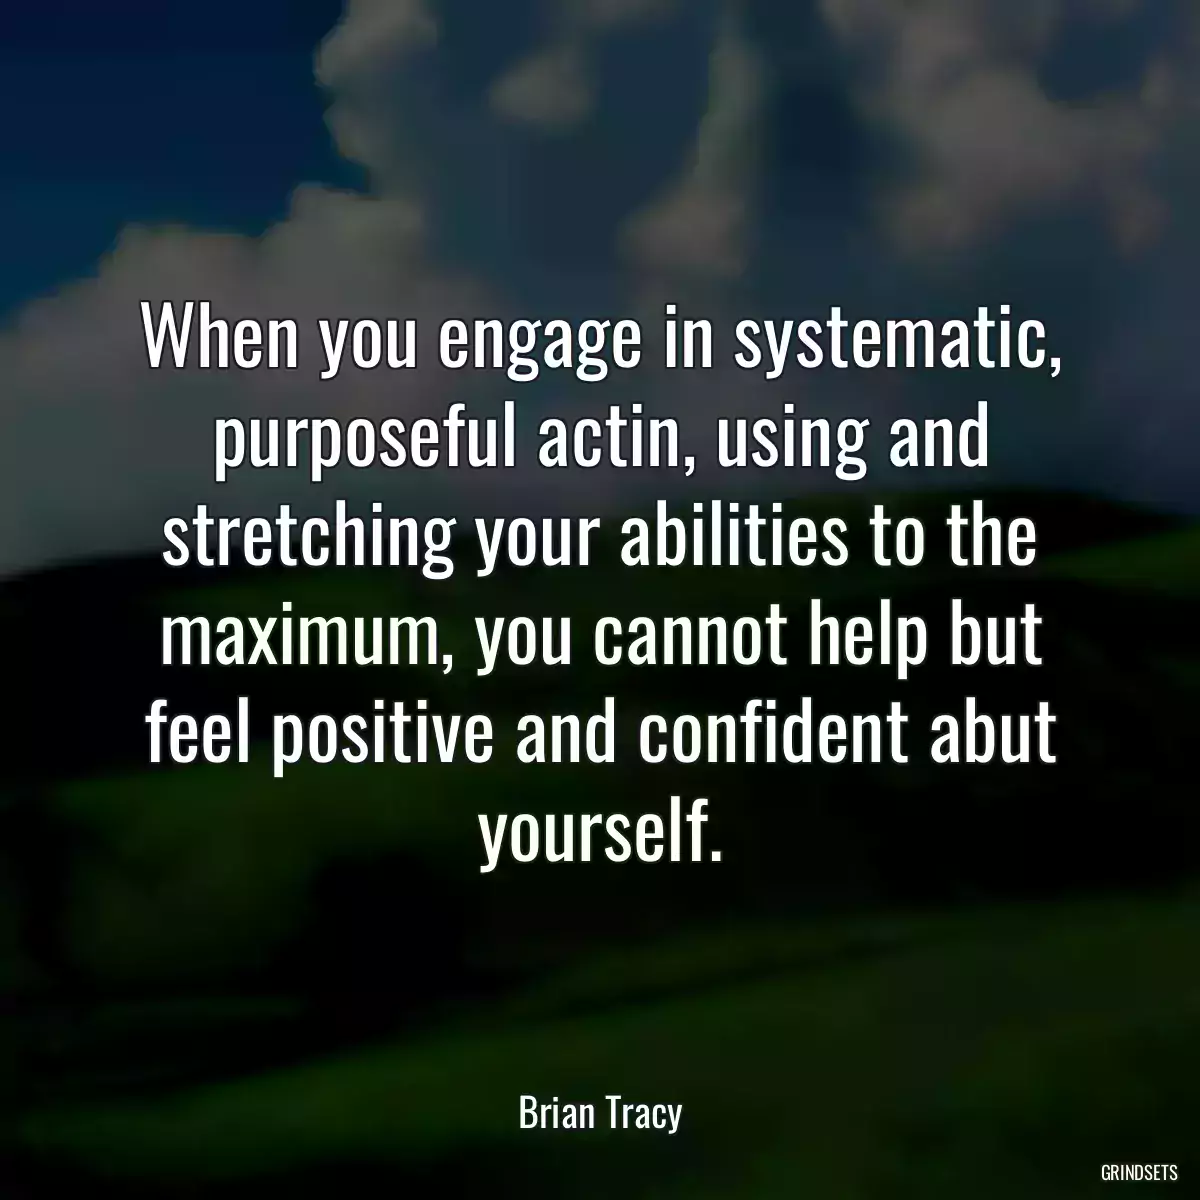 When you engage in systematic, purposeful actin, using and stretching your abilities to the maximum, you cannot help but feel positive and confident abut yourself.